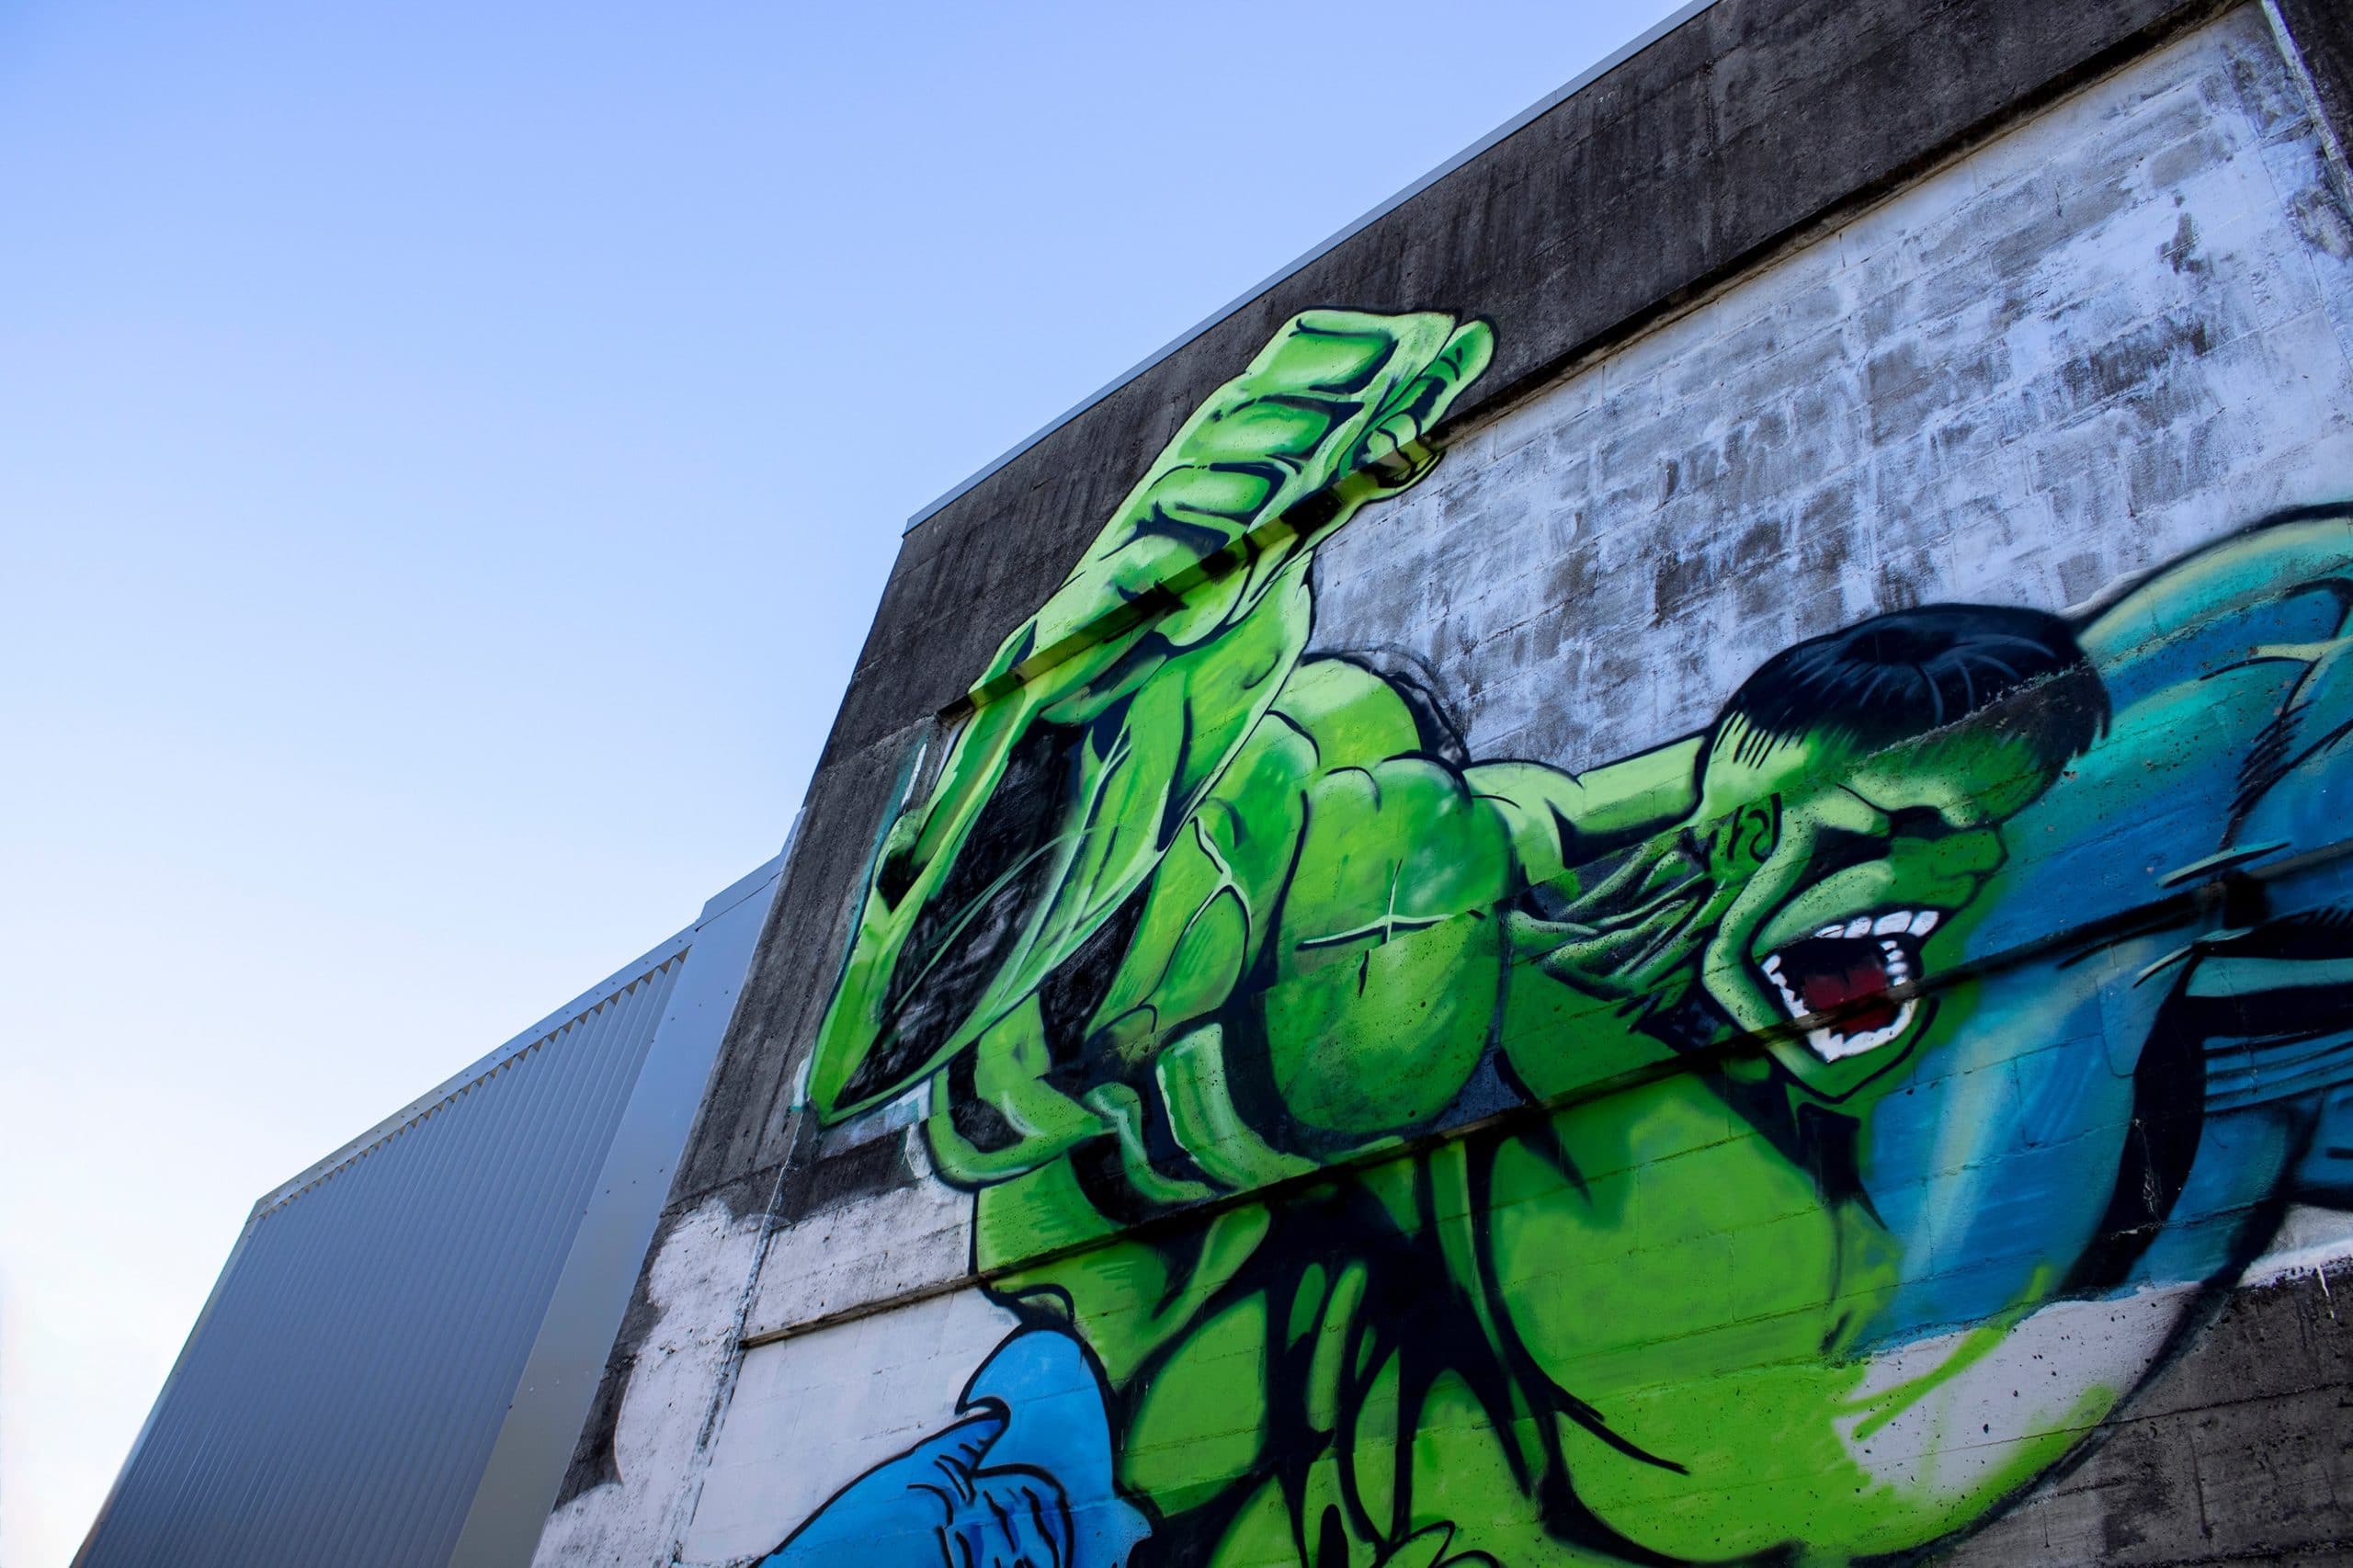 The hulk mural on side of building